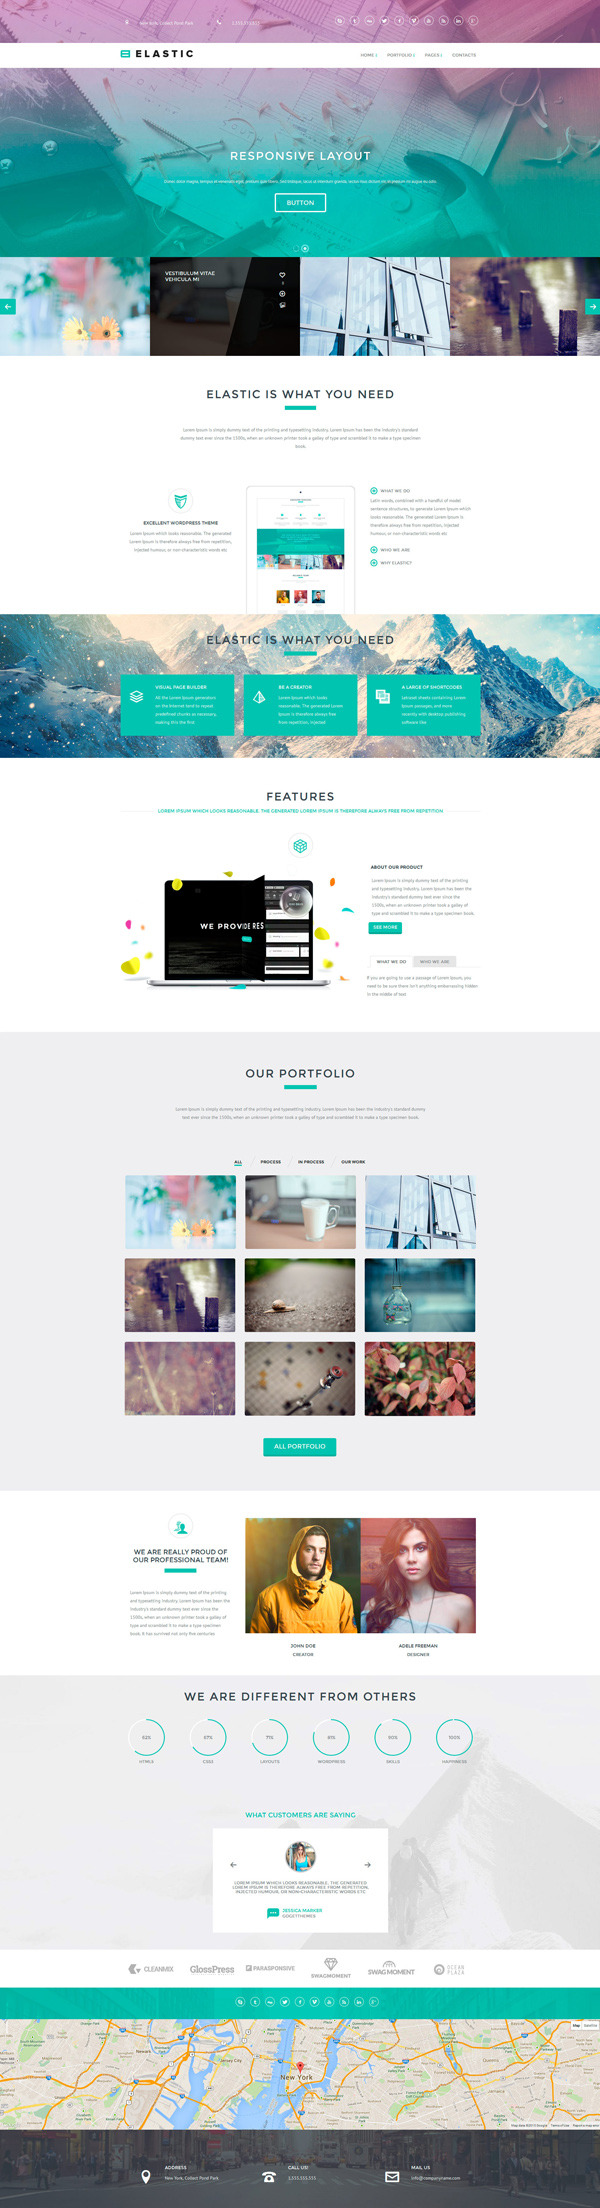 Elastic - WordPress Theme and Page Builder